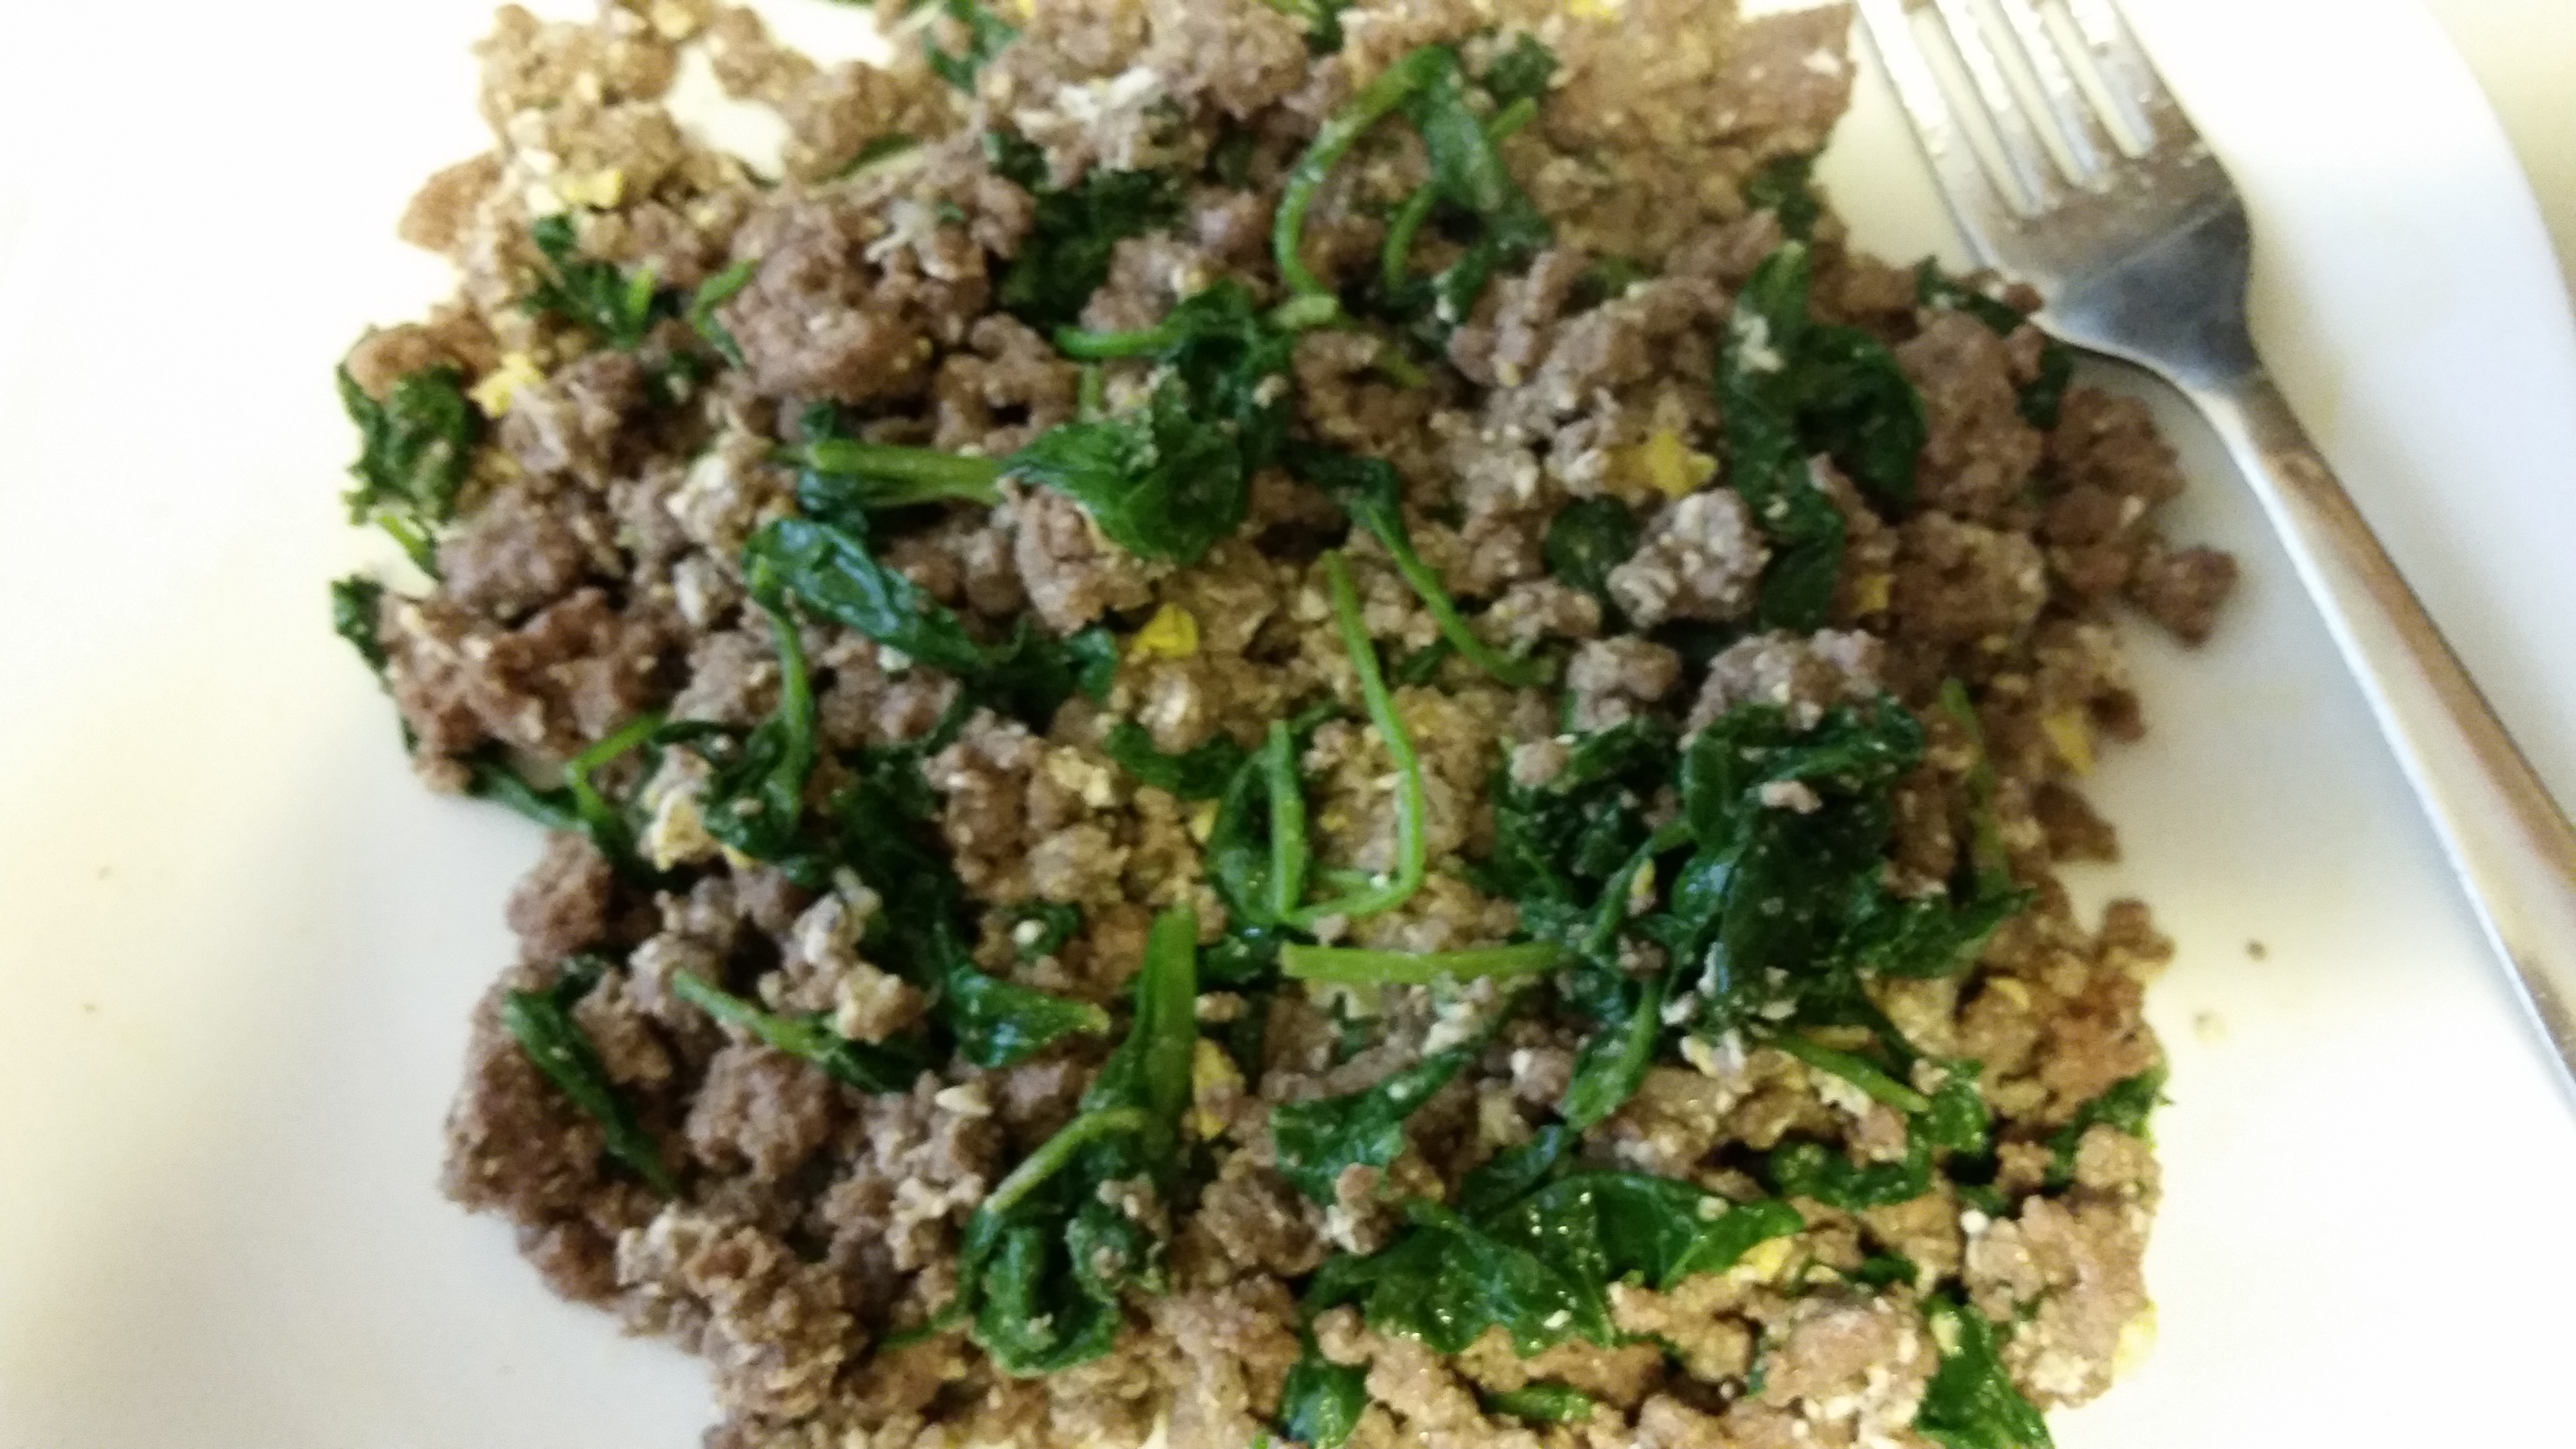 Breakfast: 8:20 a.m. | organic ground beef, eggs, baby kale, herbs & spices